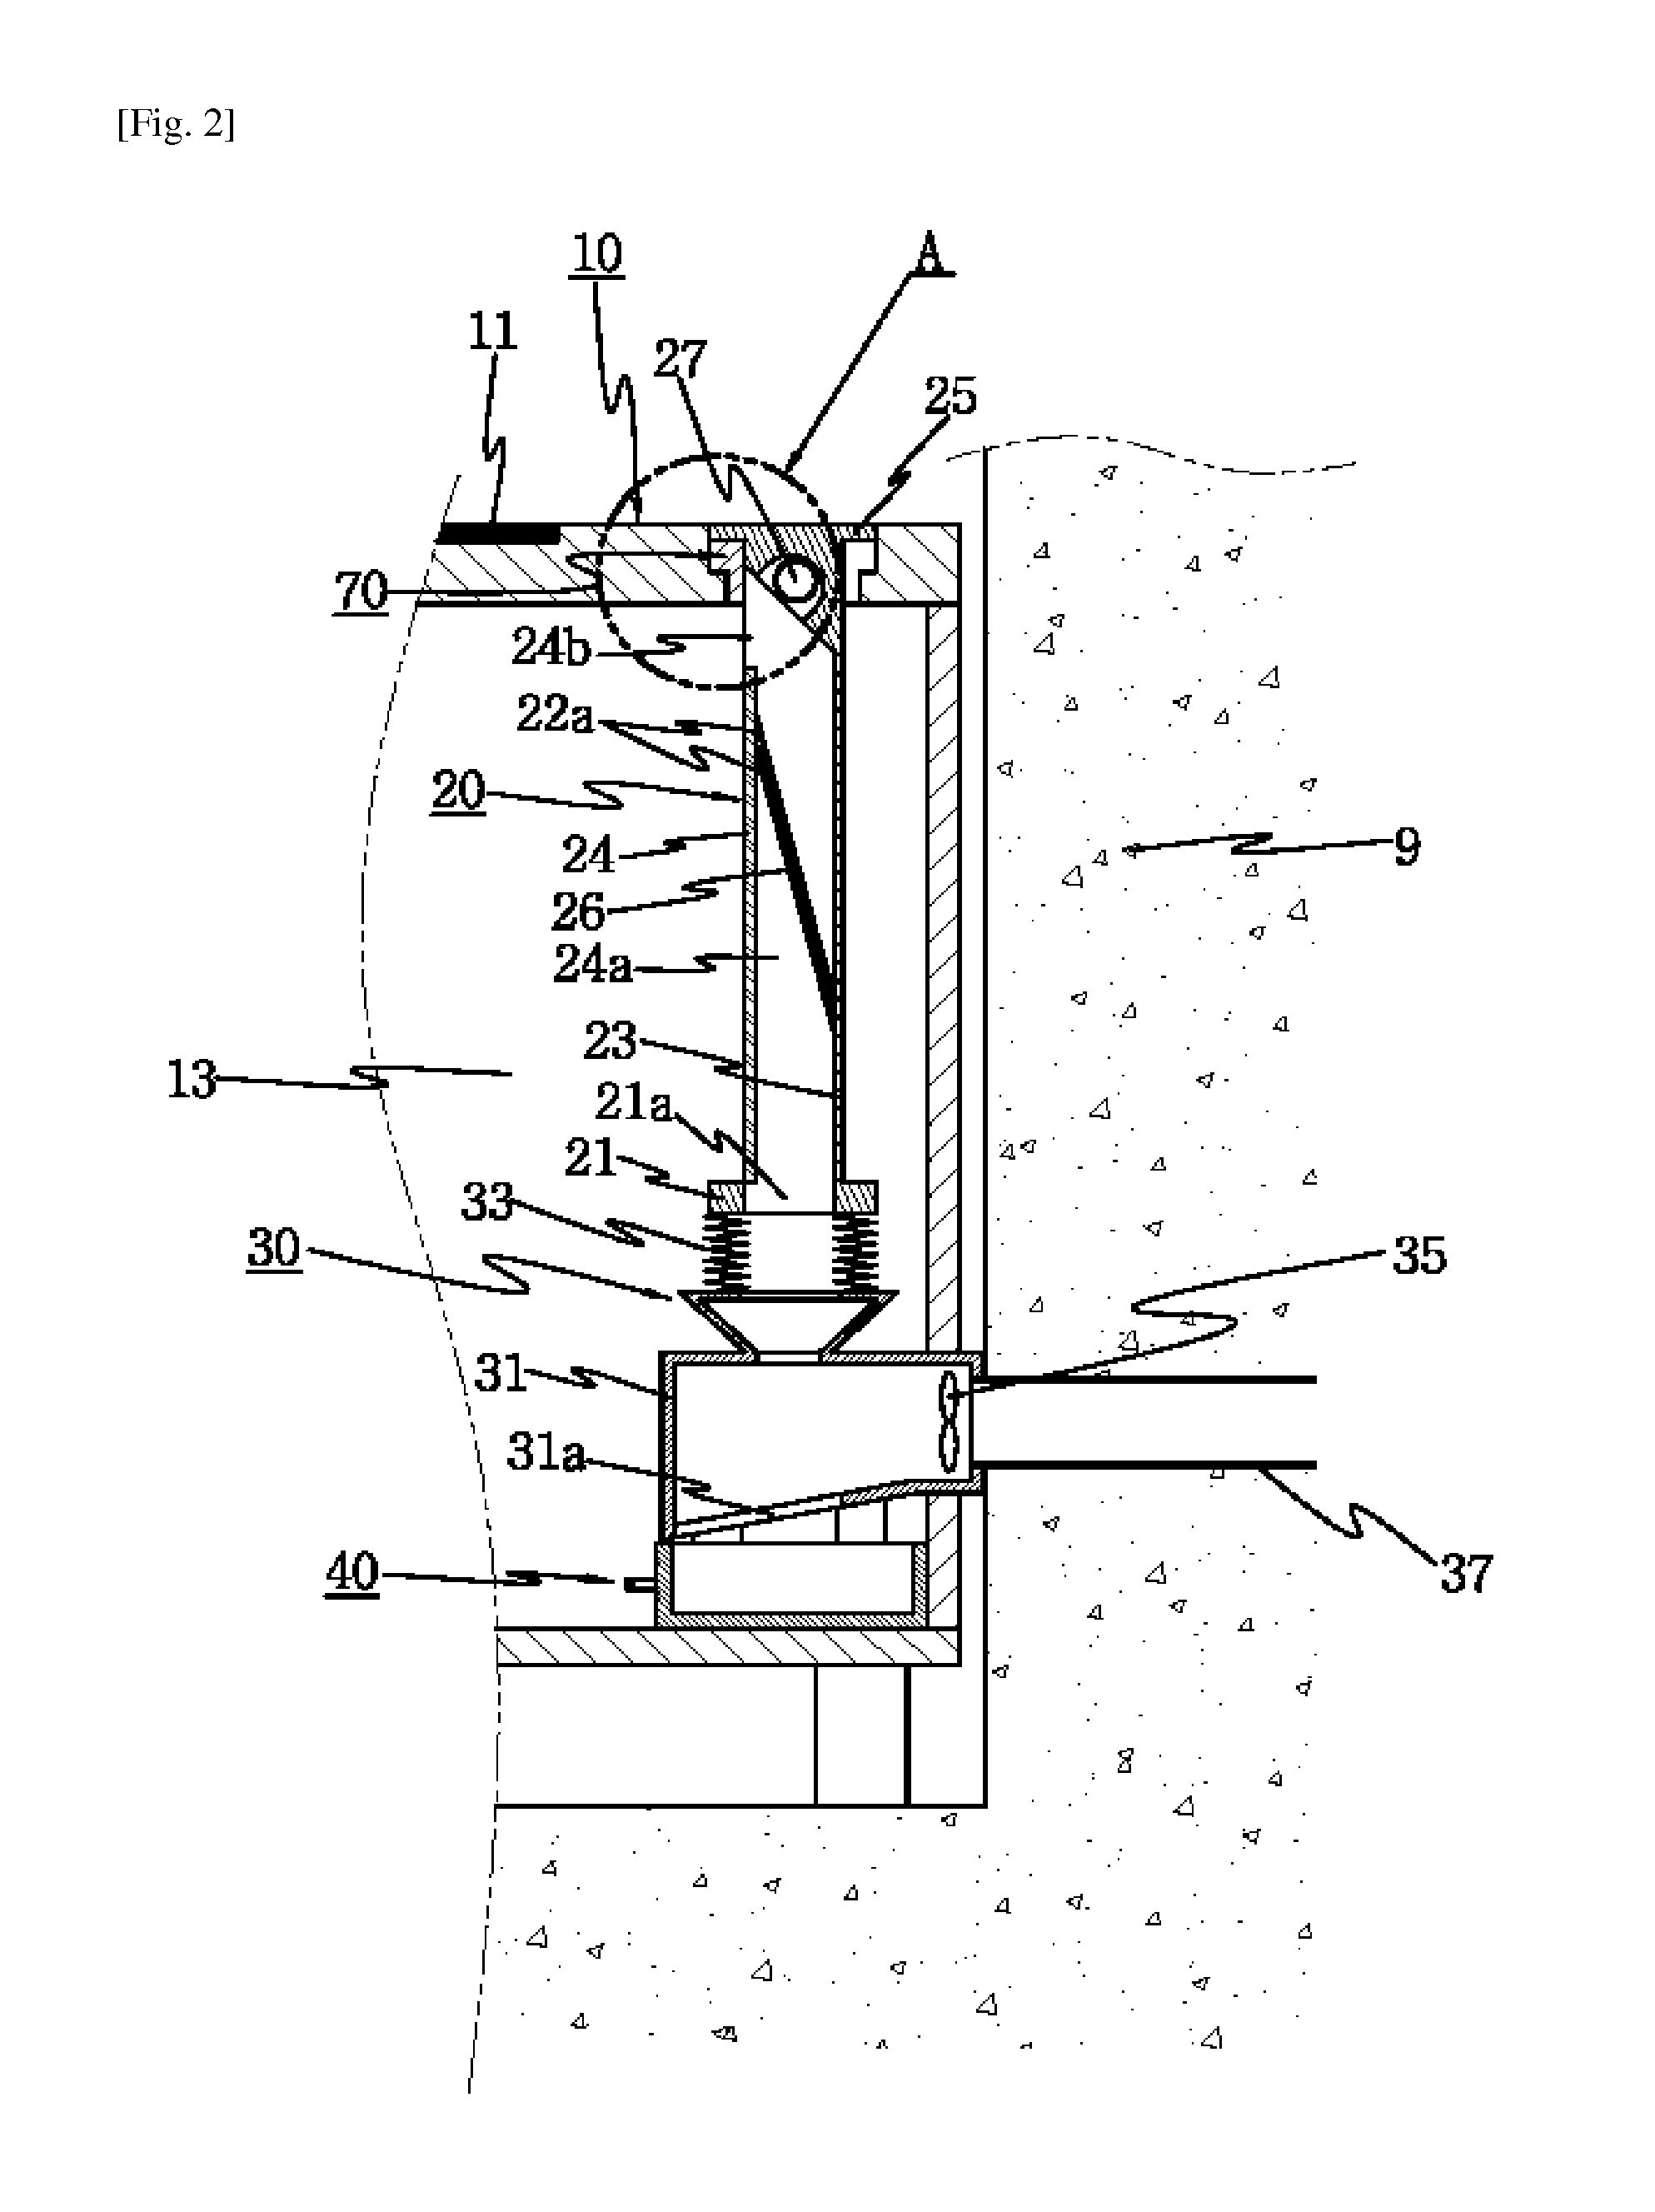 Induction ventilation system for air supply and exhaust